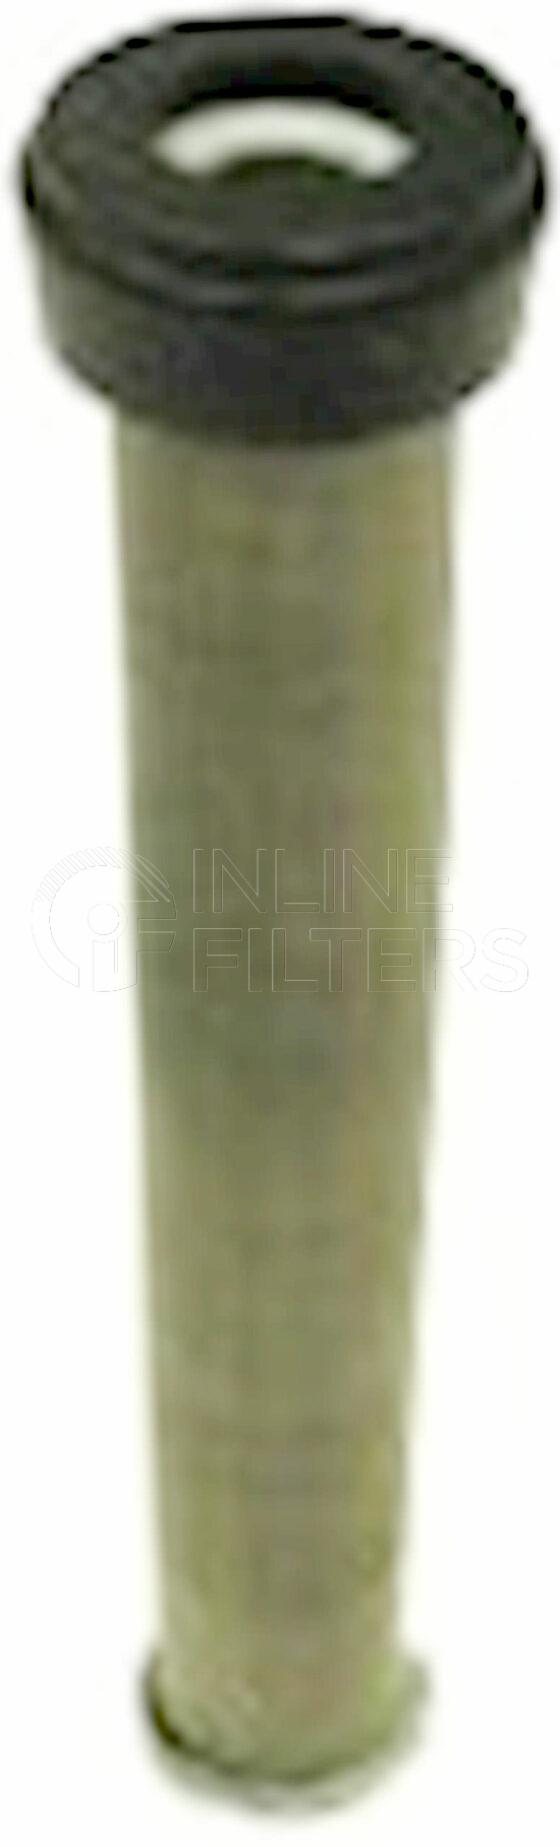 Inline FL70520. Lube Filter Product – Brand Specific Inline – Undefined Product Lube filter product